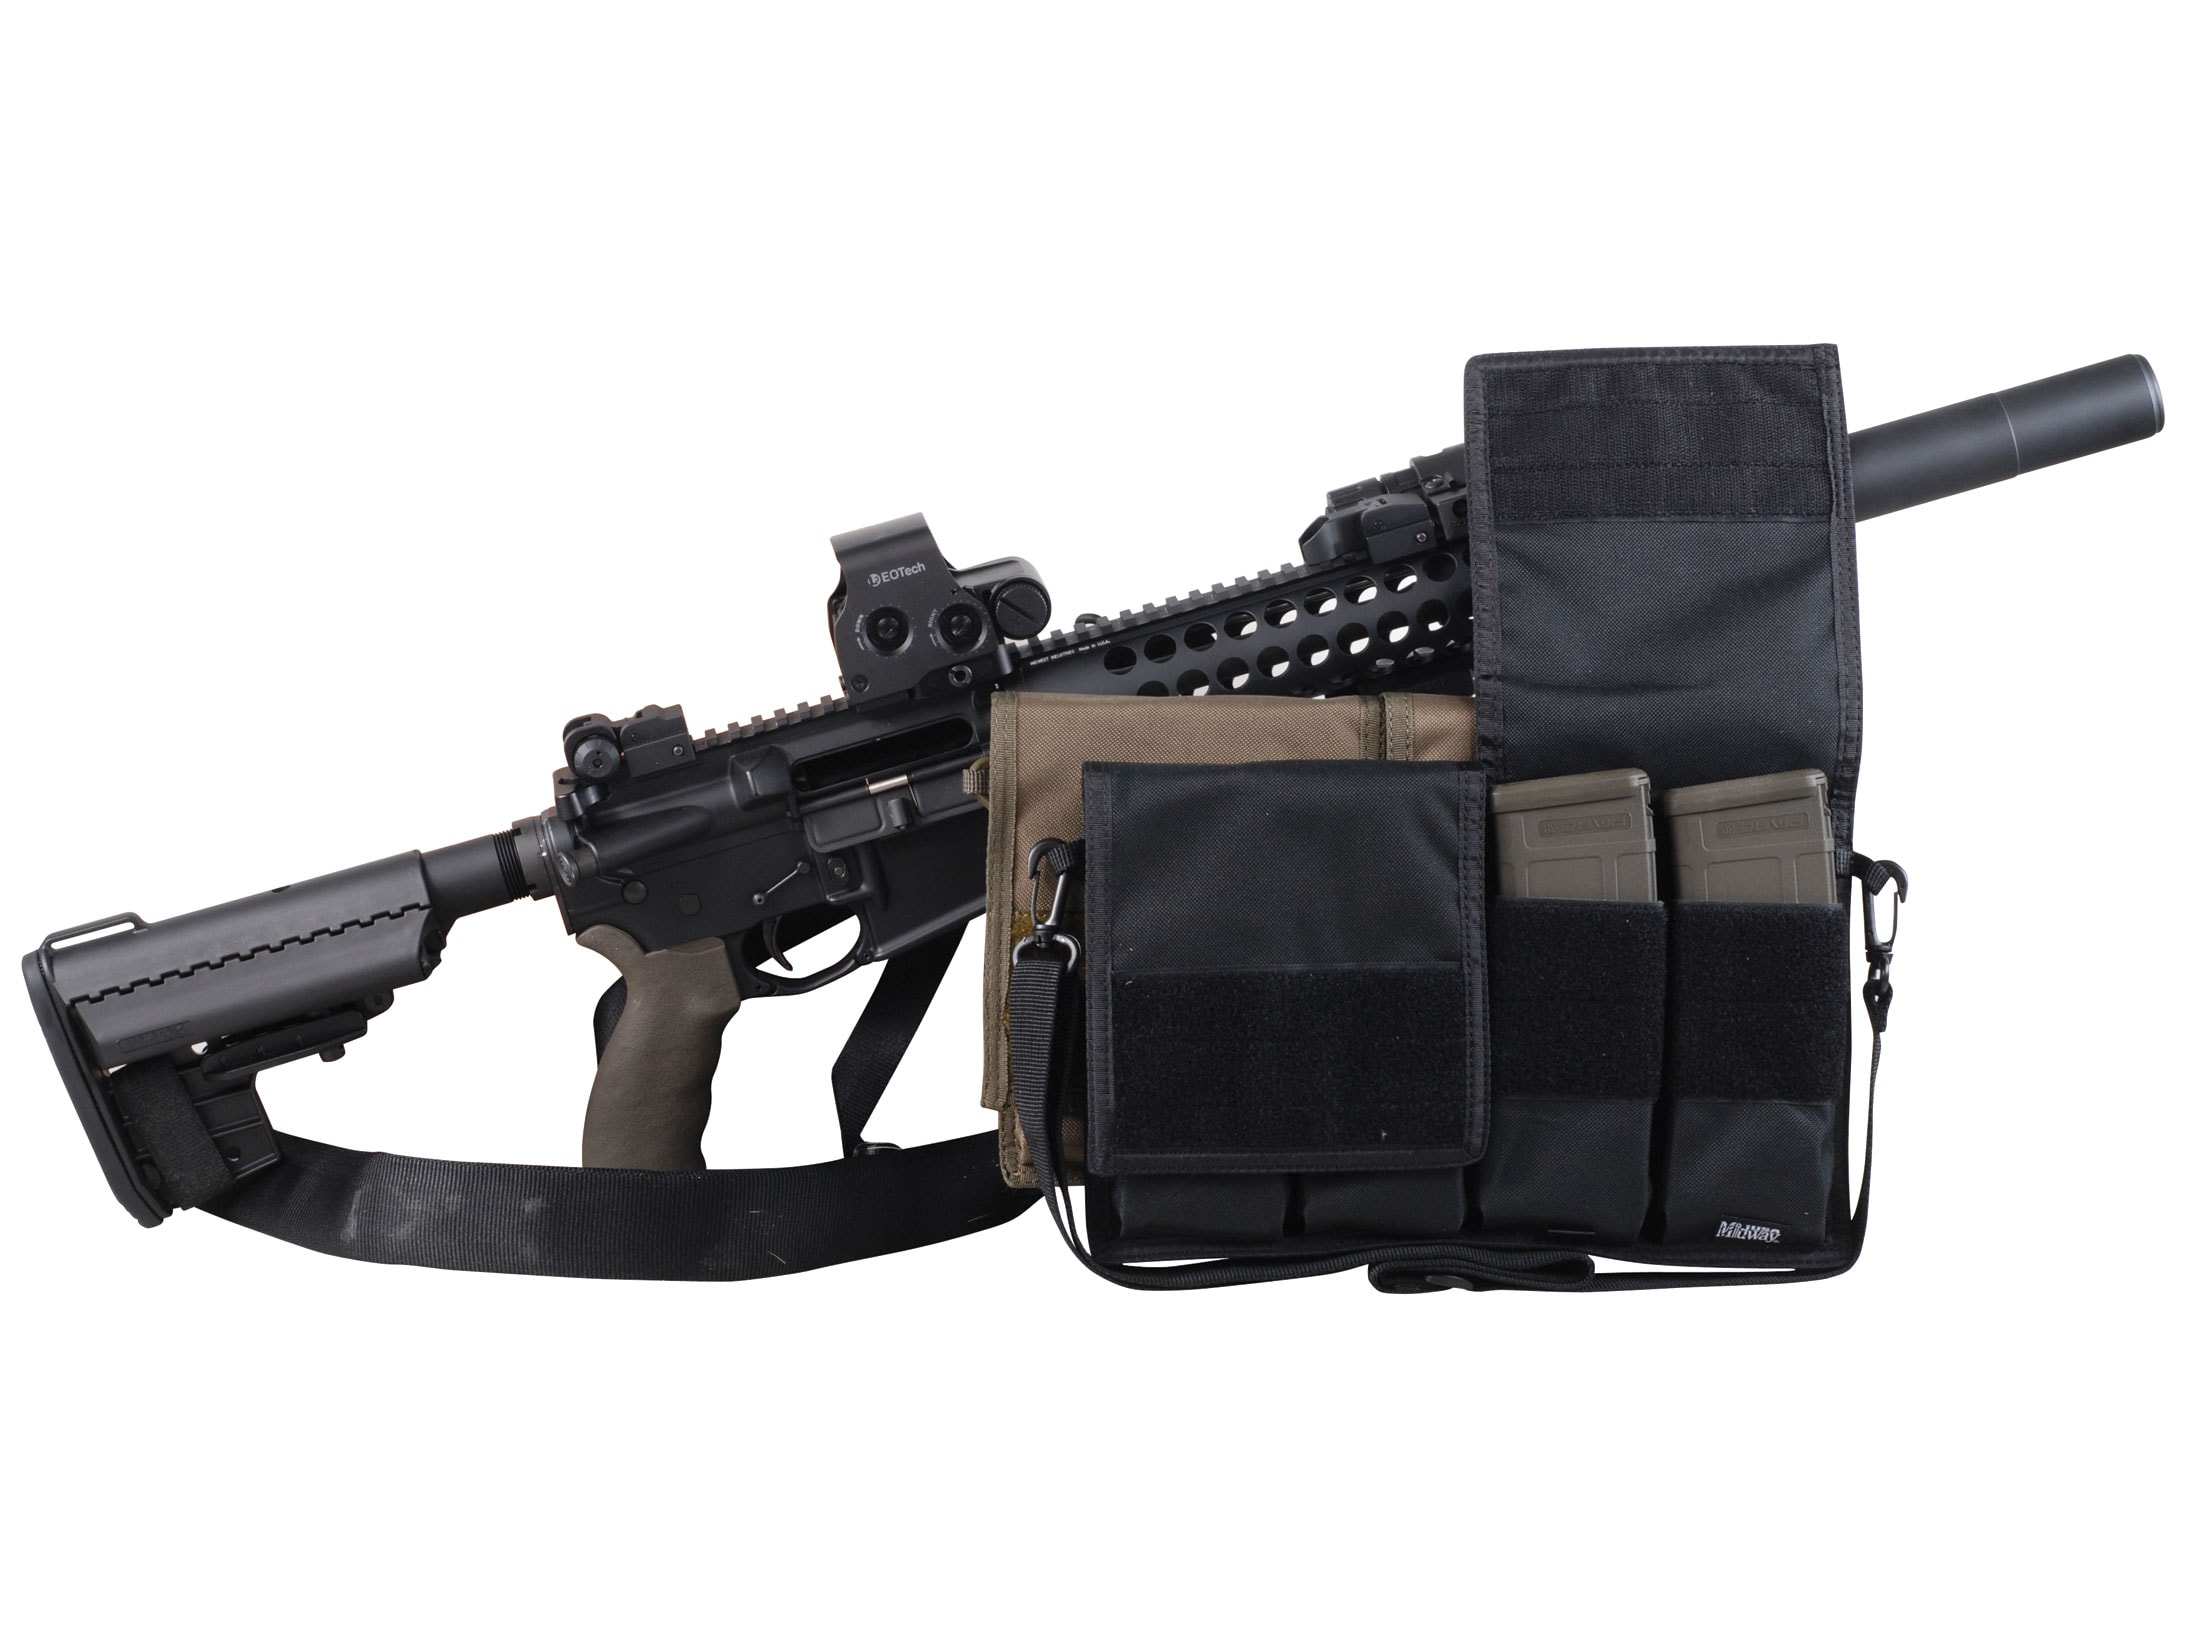 MidwayUSA 4 Magazine Pouch AR-15 and AK-47 Rifle For Sale